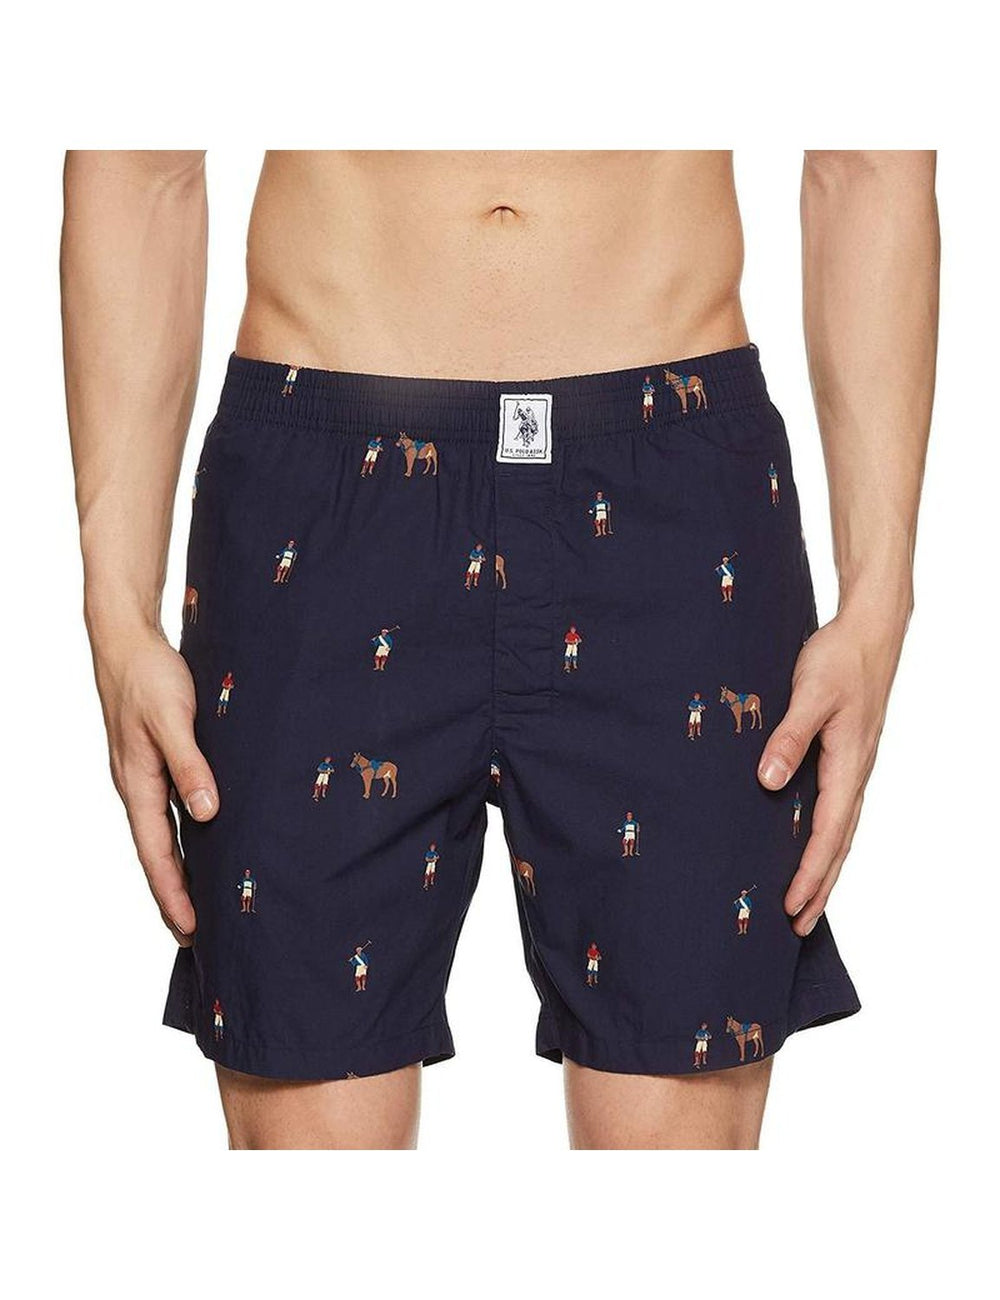 US Polo Printed Blue Cotton Boxers Shorts for Men